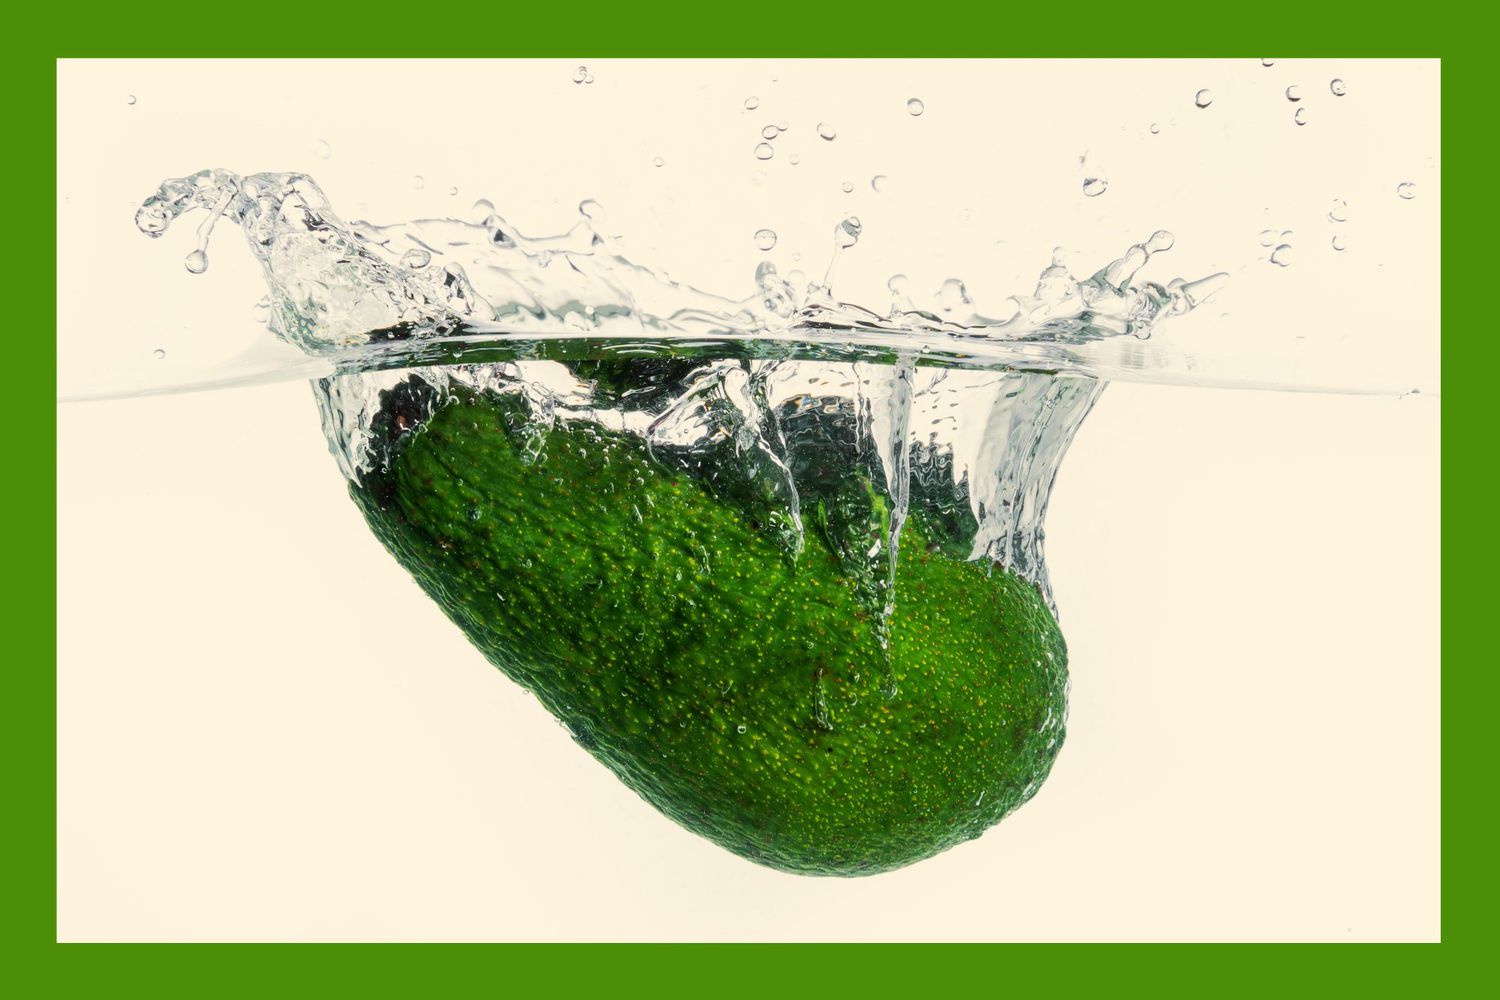 Ripe, green Avocado being dropped in water, creating a splash